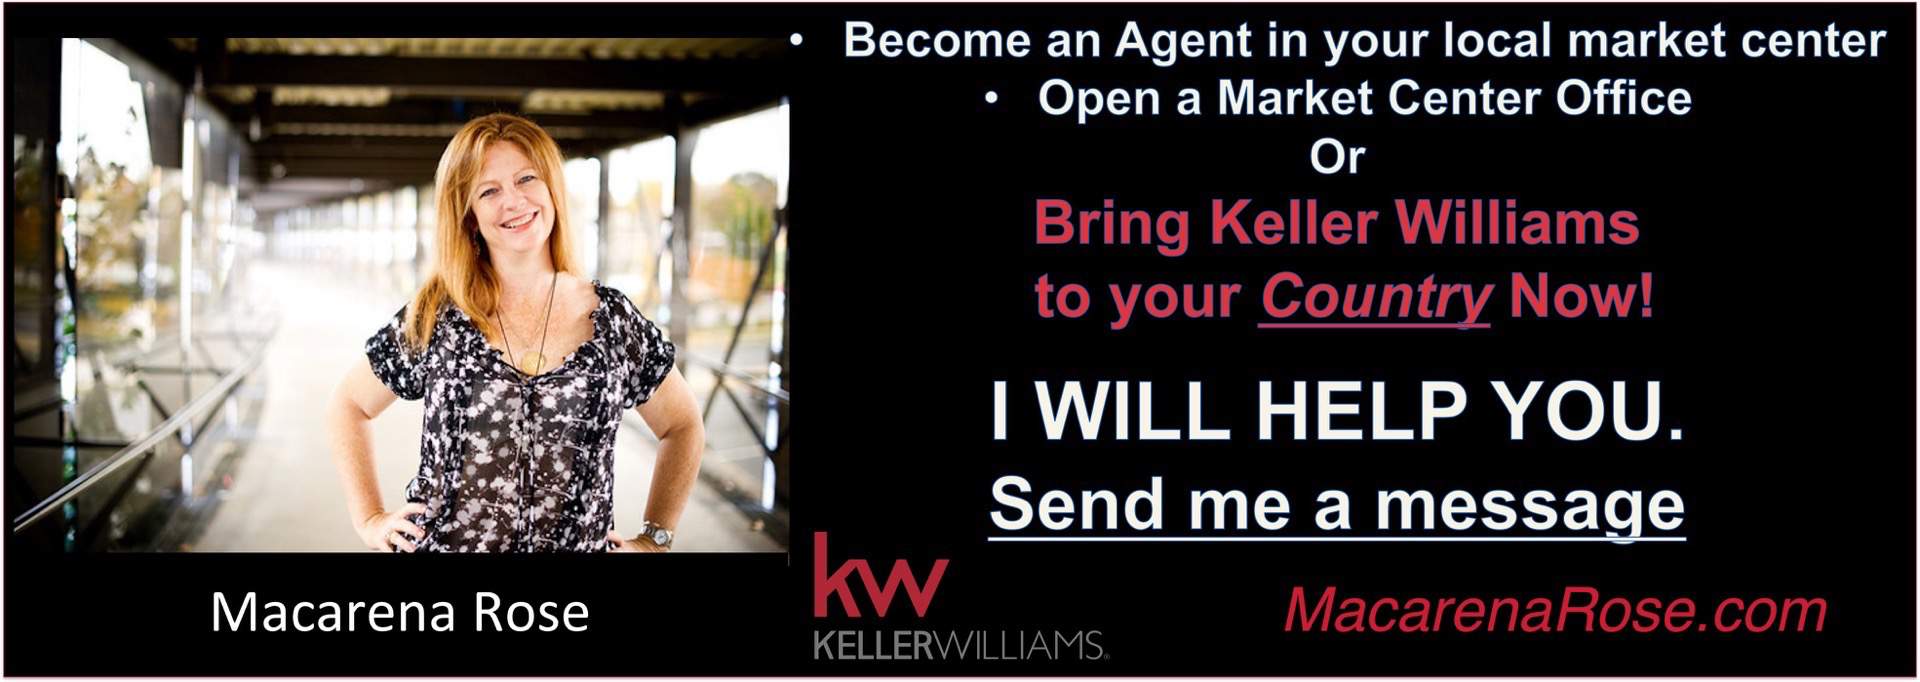 Open Keller Williams in a Country